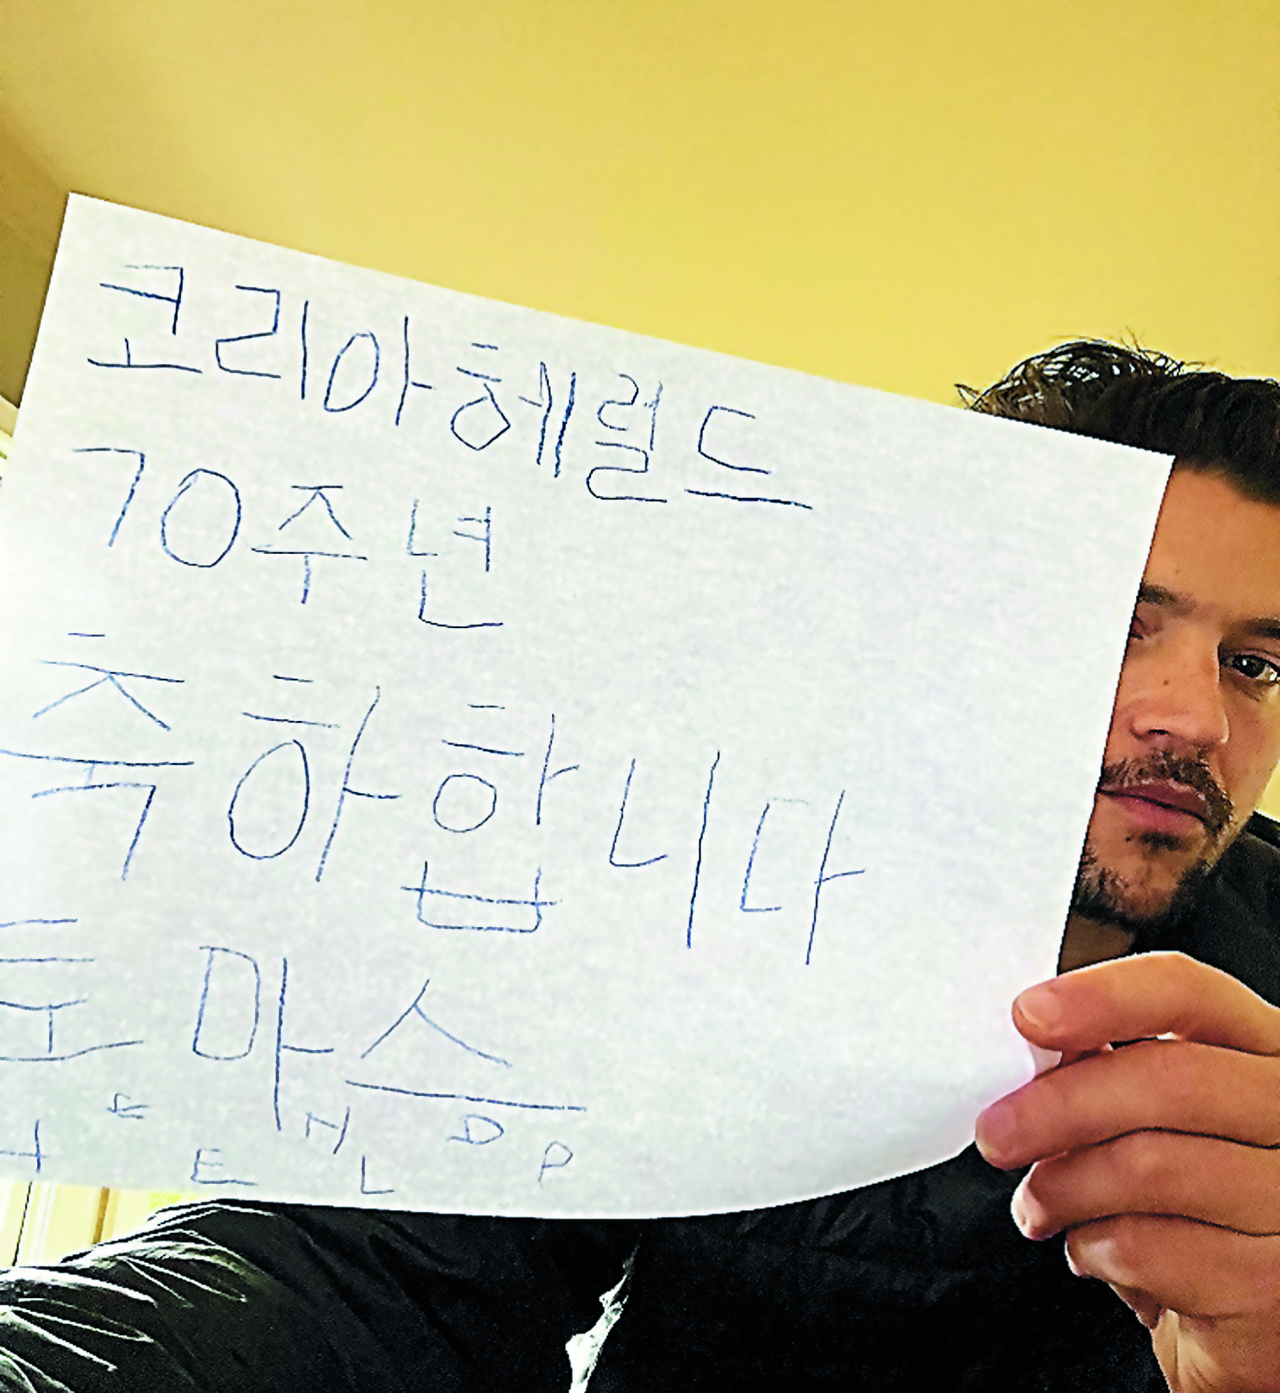 McDonell holds a handwritten message of congratulations for The Korea Herald's 70th anniversary, in Korean. (Courtesy of McDonell)